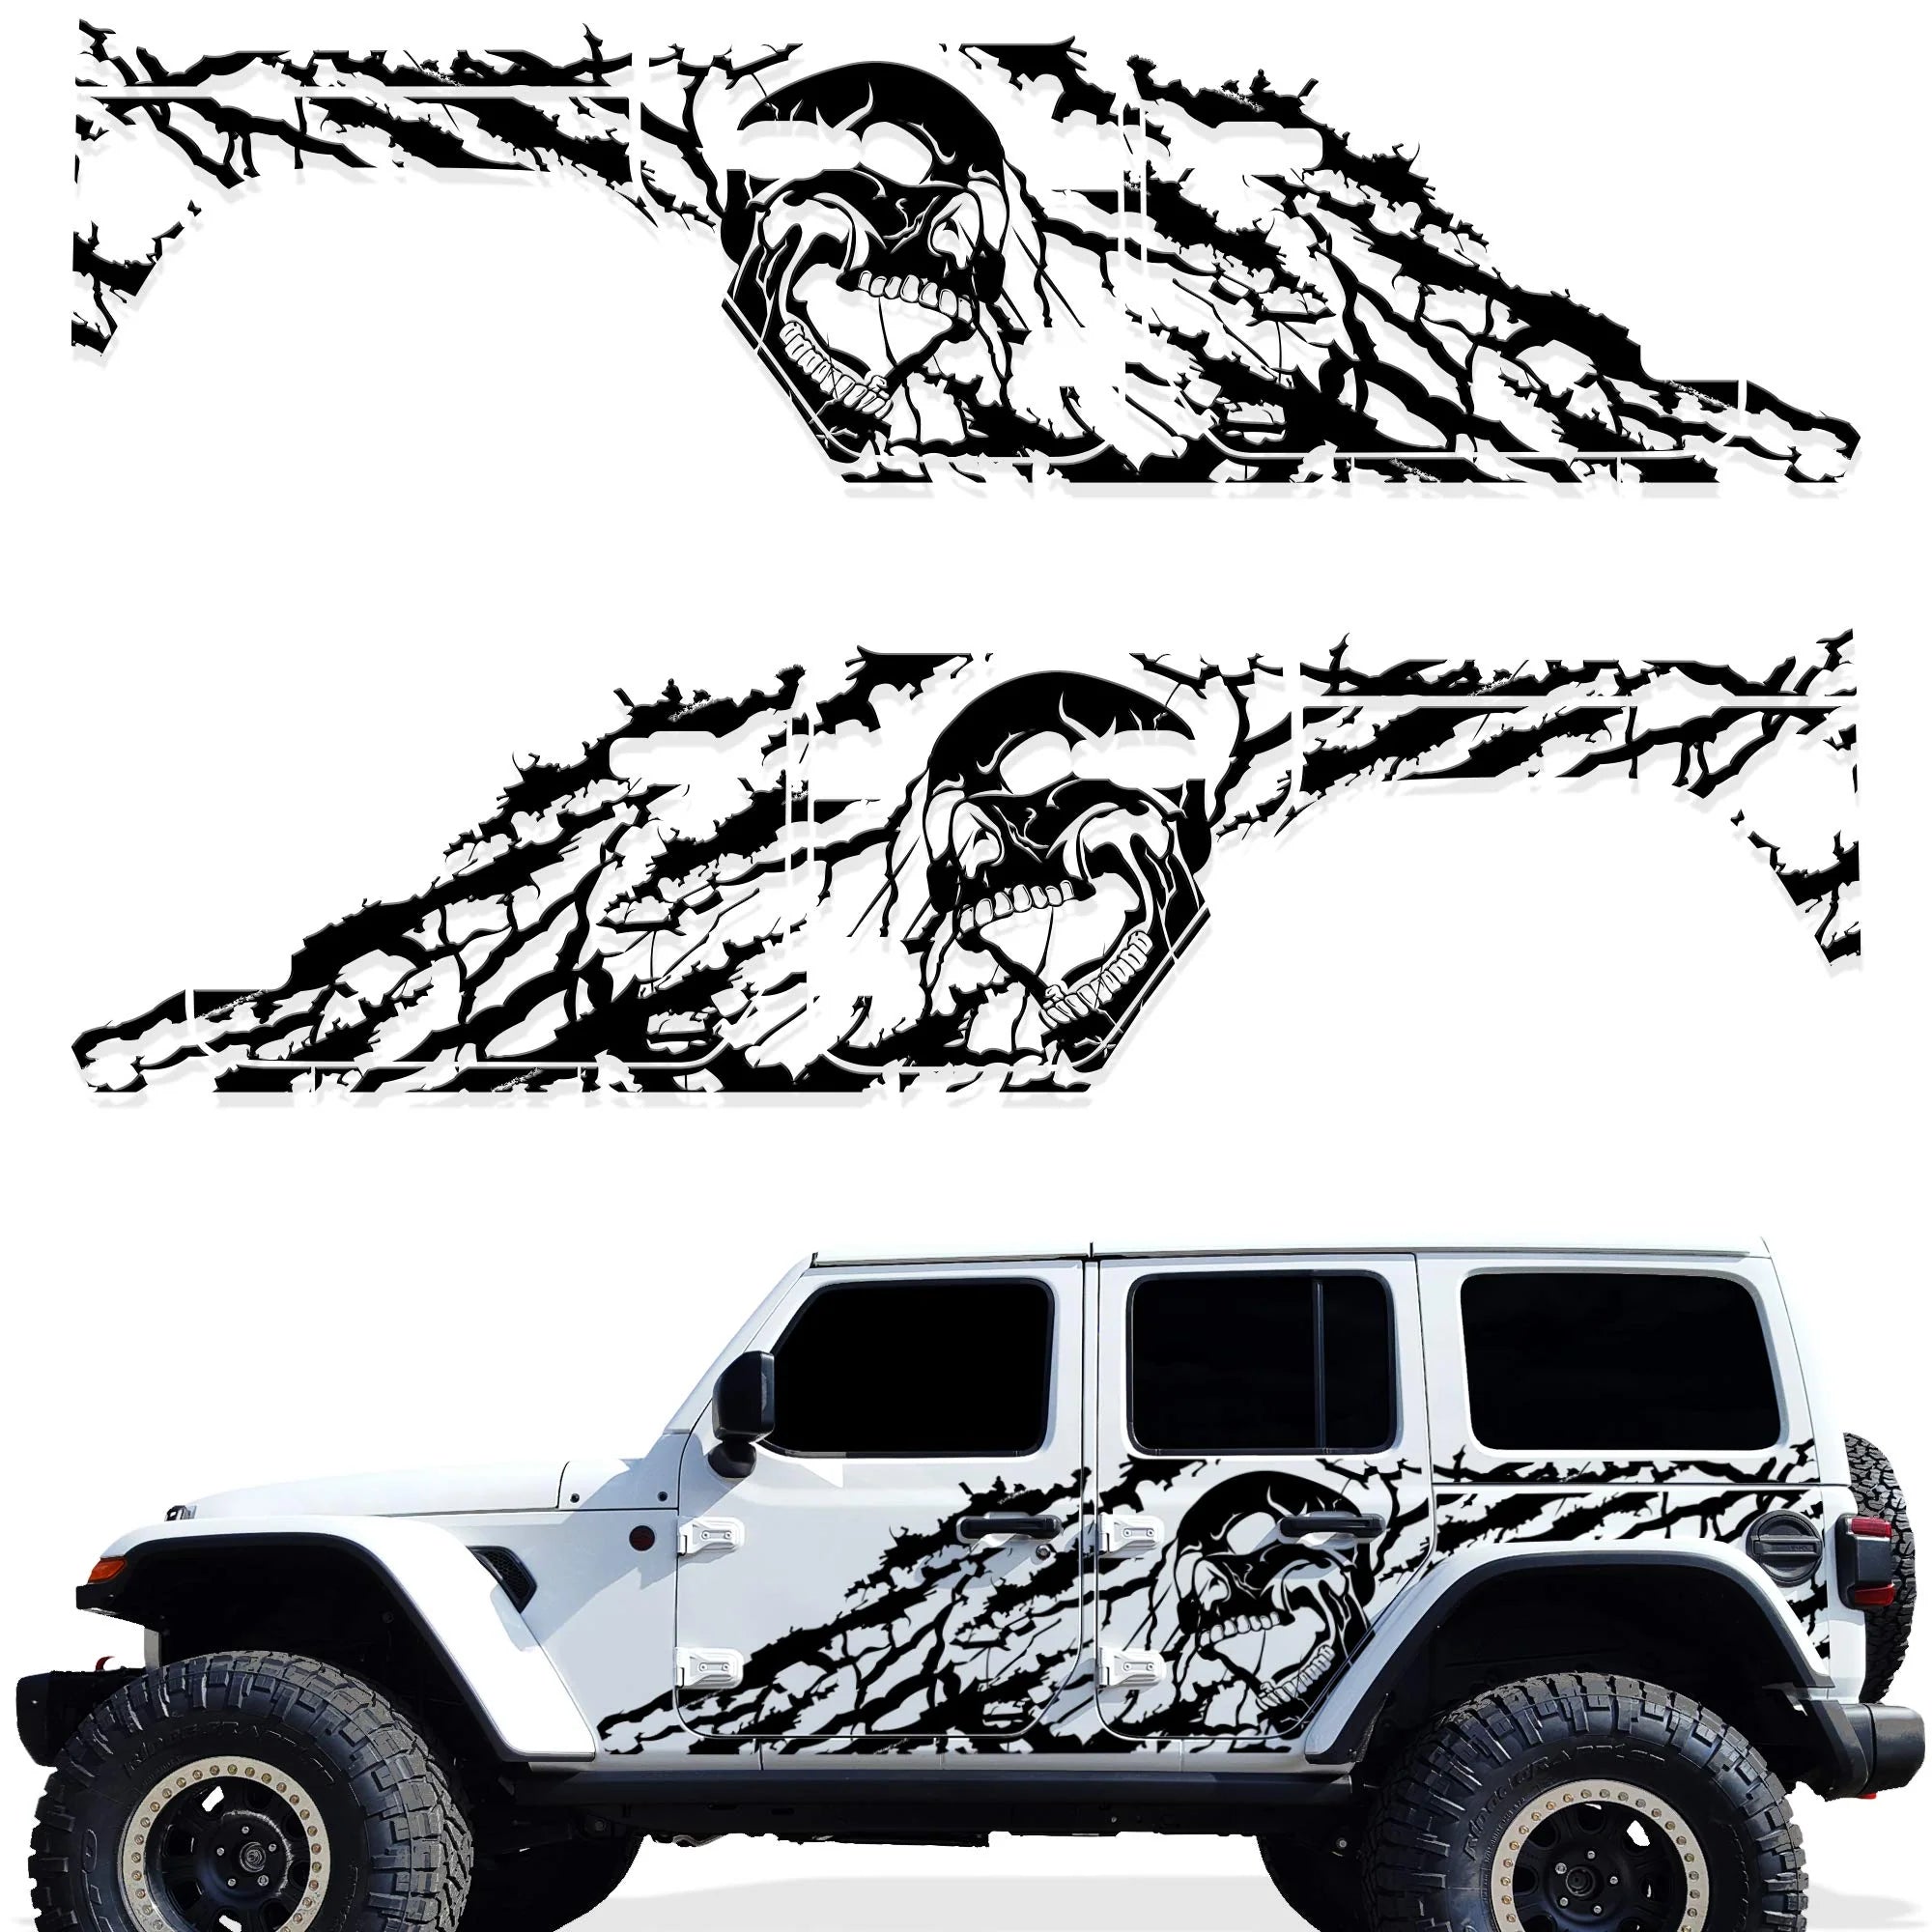 Decals are a mod that can make your Jeep more fun and unique.